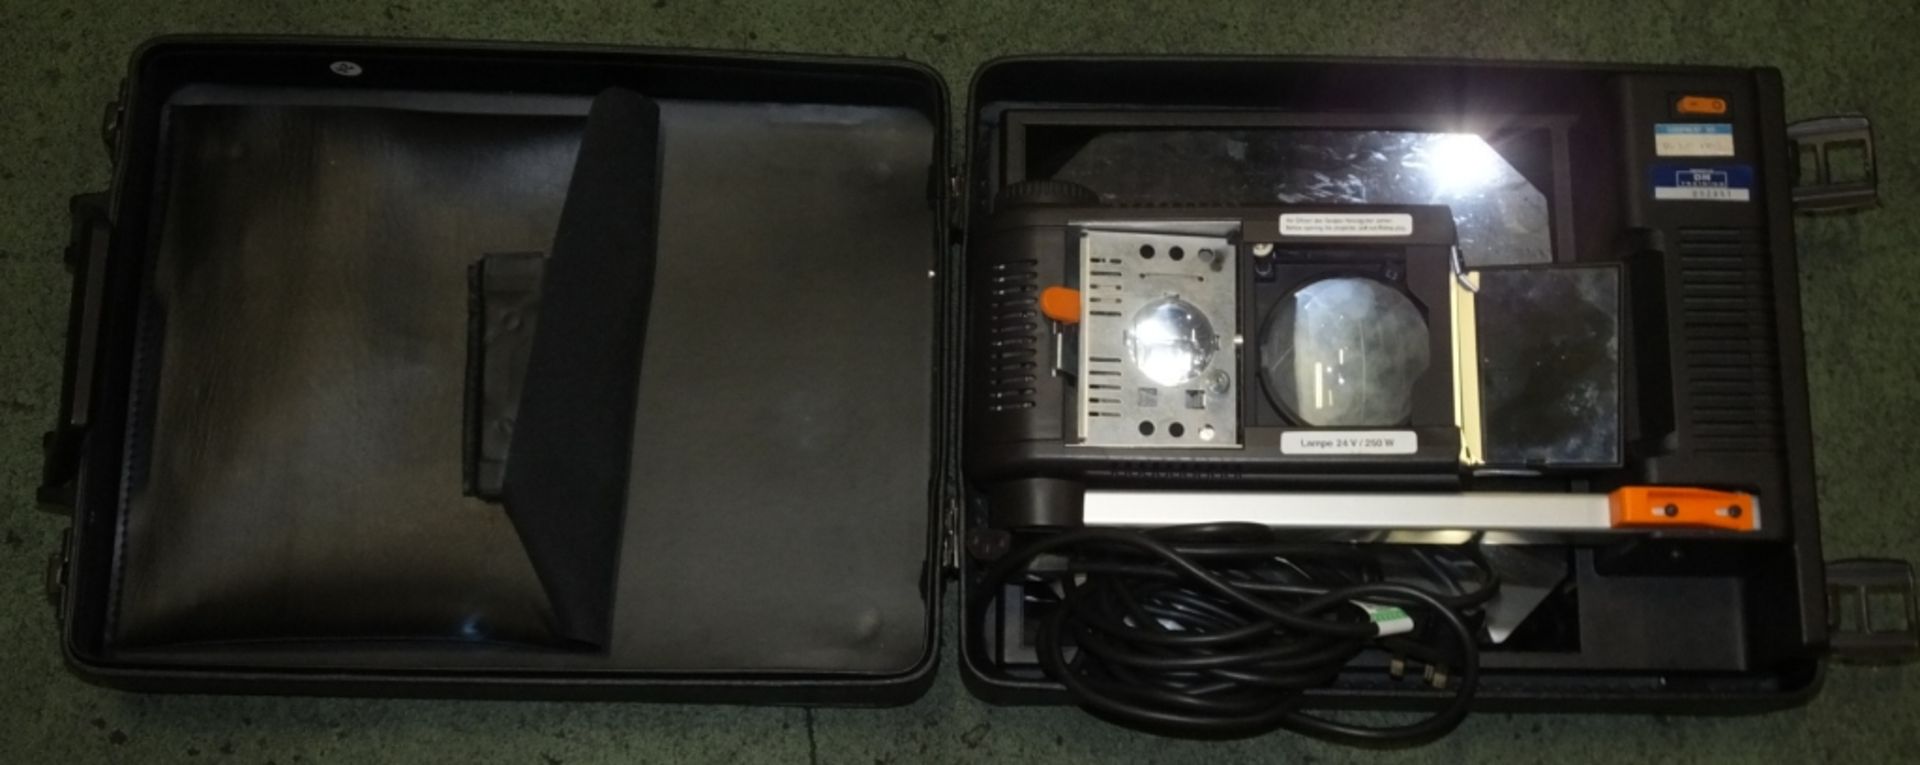 Overhead Projector in carry case